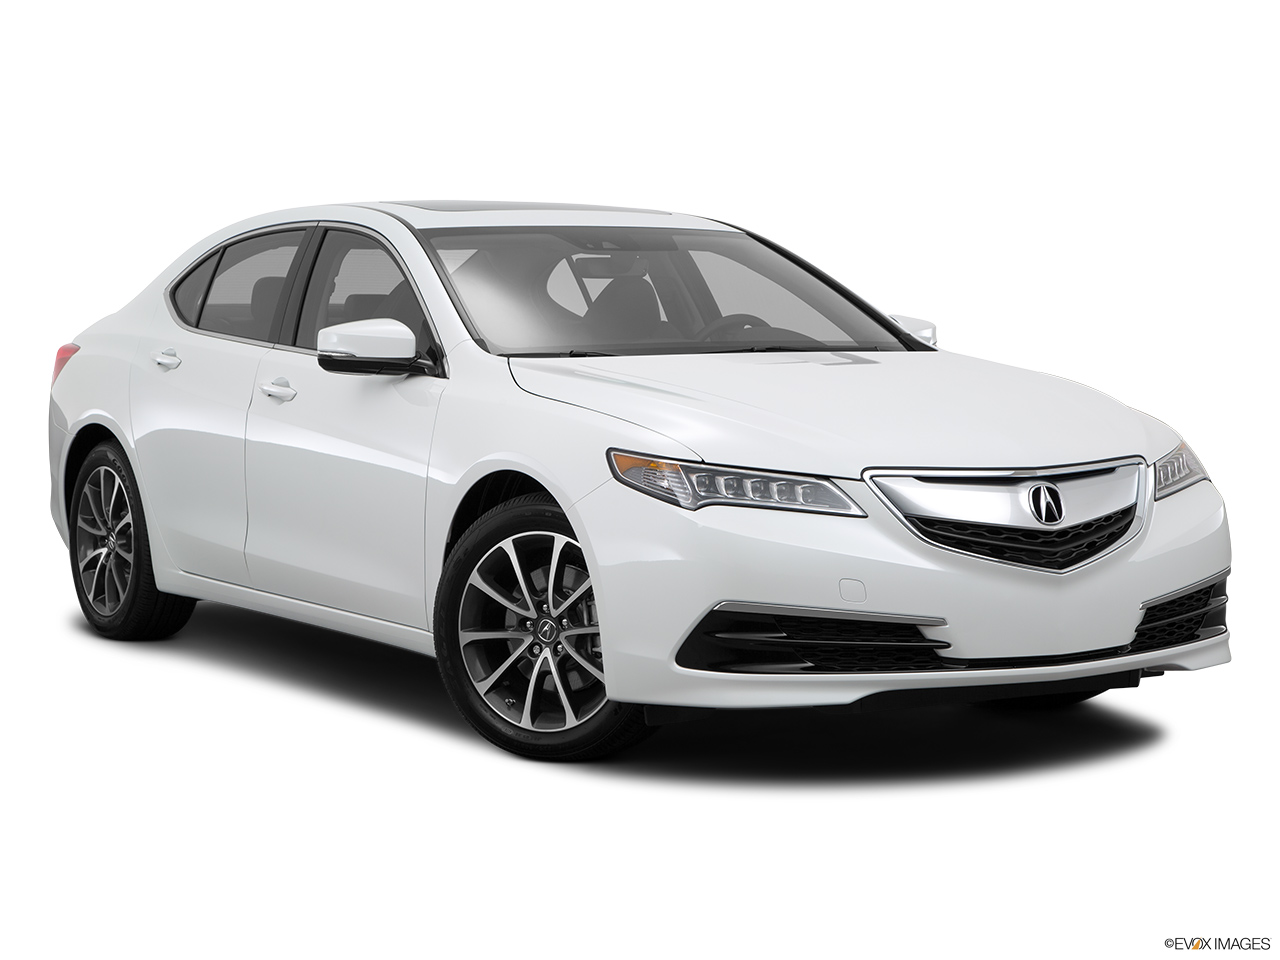 2015 Acura TLX 3.5 V-6 9-AT SH-AWD Front passenger 3/4 w/ wheels turned. 